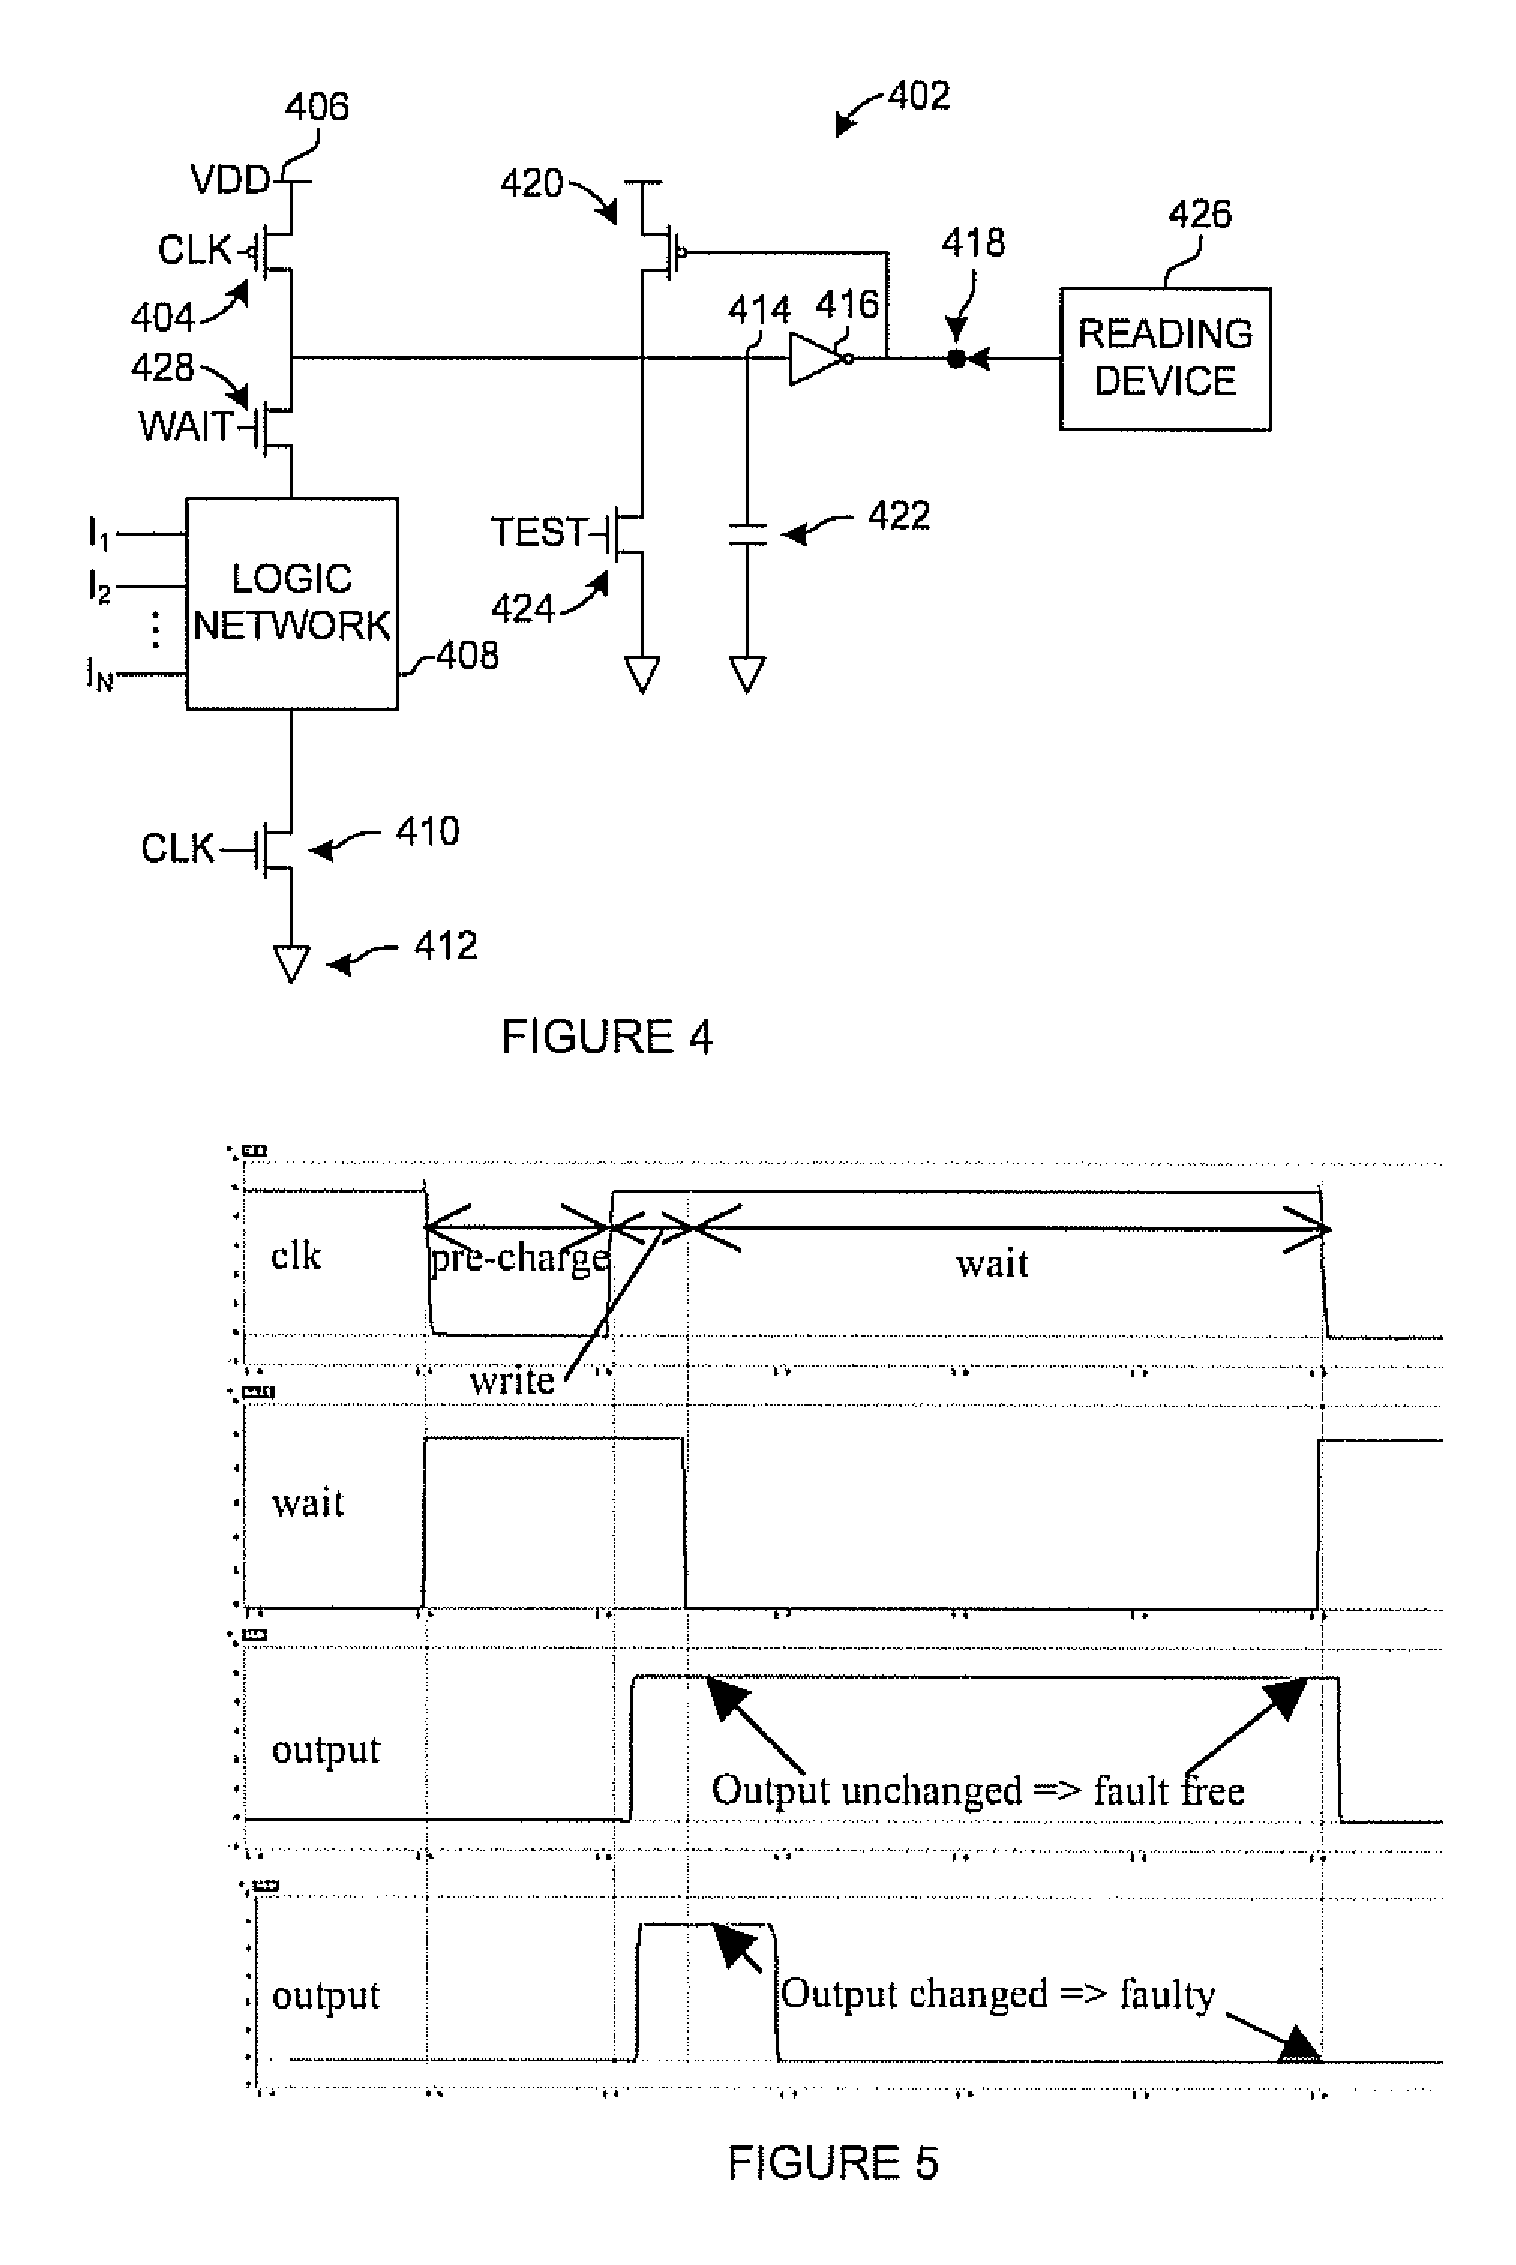 Domino logic testing systems and methods